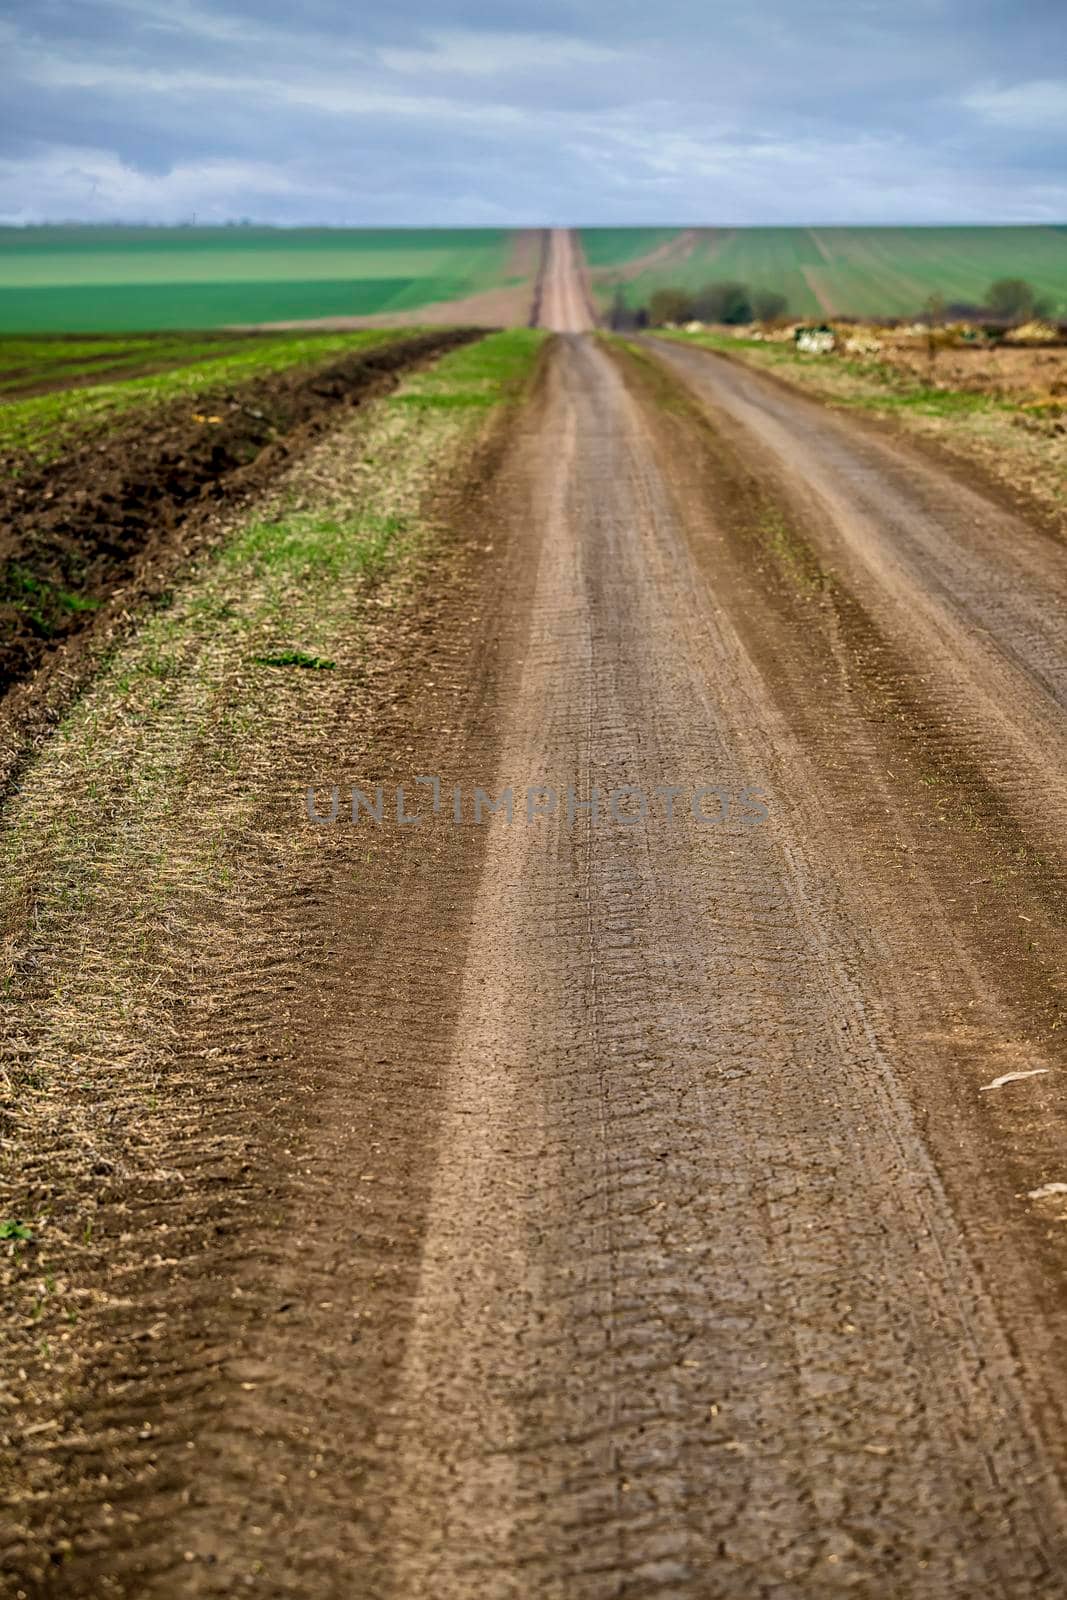 Rural road disappearing on the horizon across the field. Sky covered with white and grey clouds. Blurred background. by EdVal